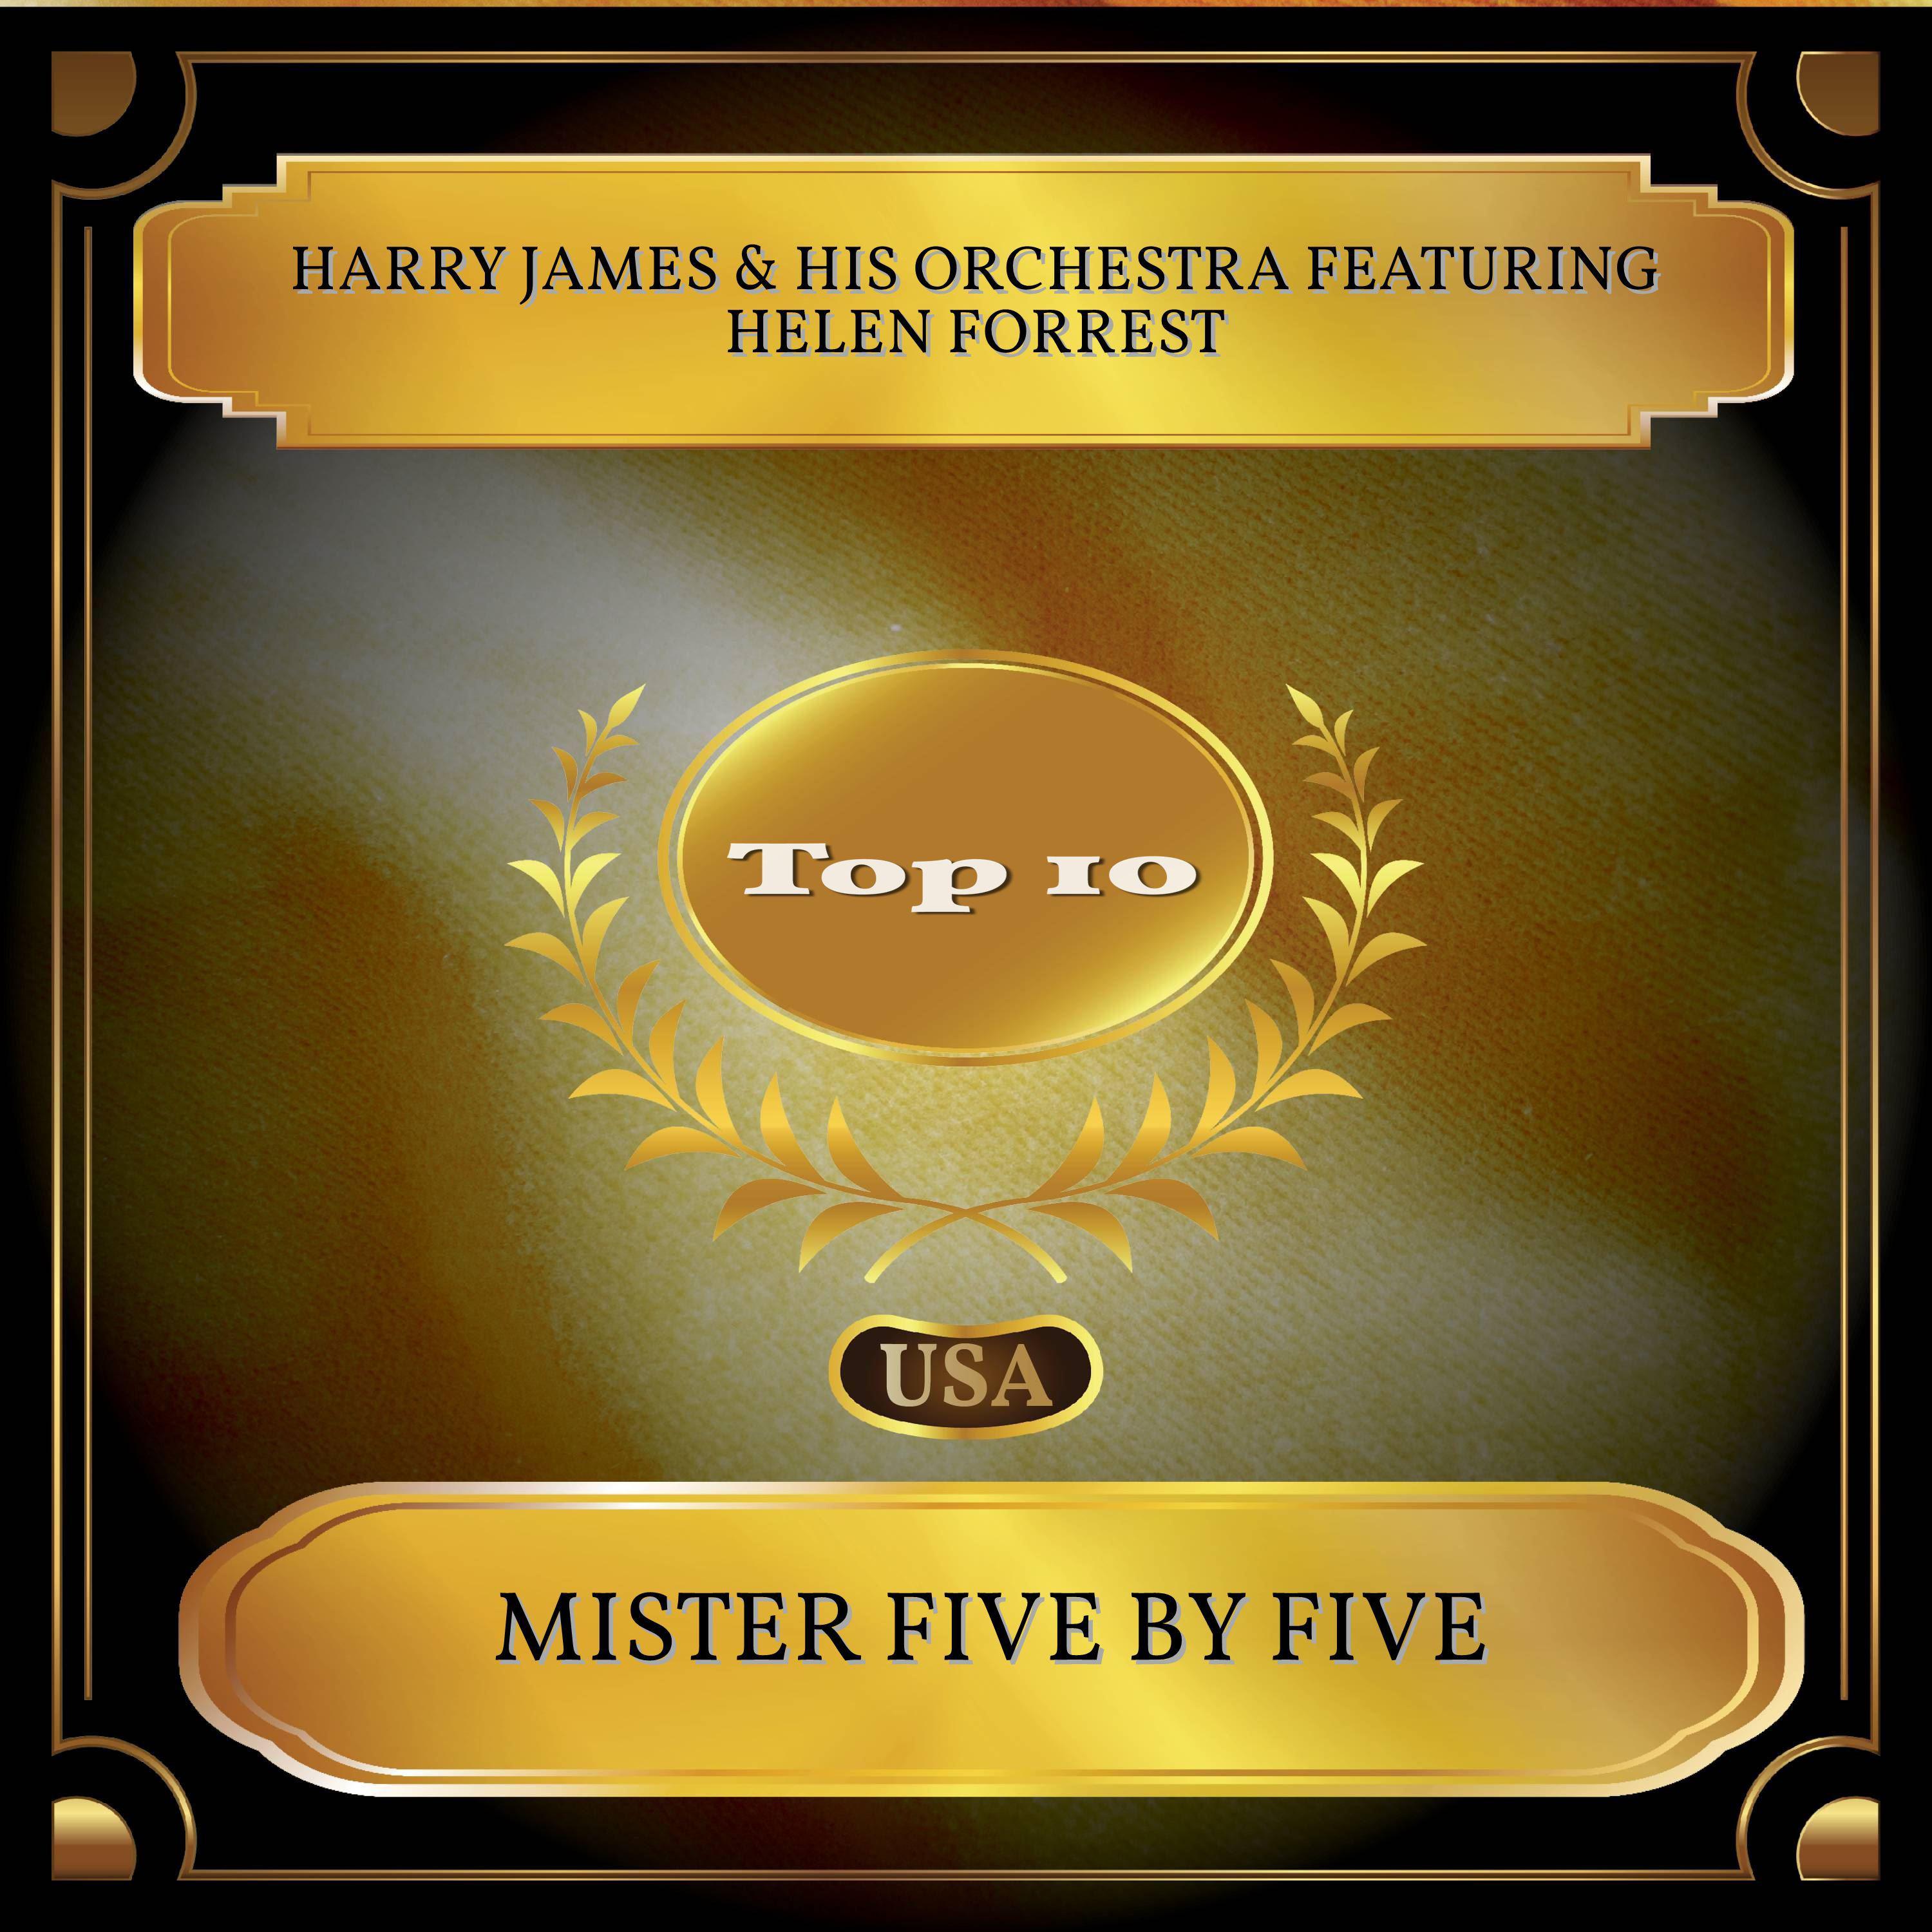 Mister Five By Five (Billboard Hot 100 - No. 02)